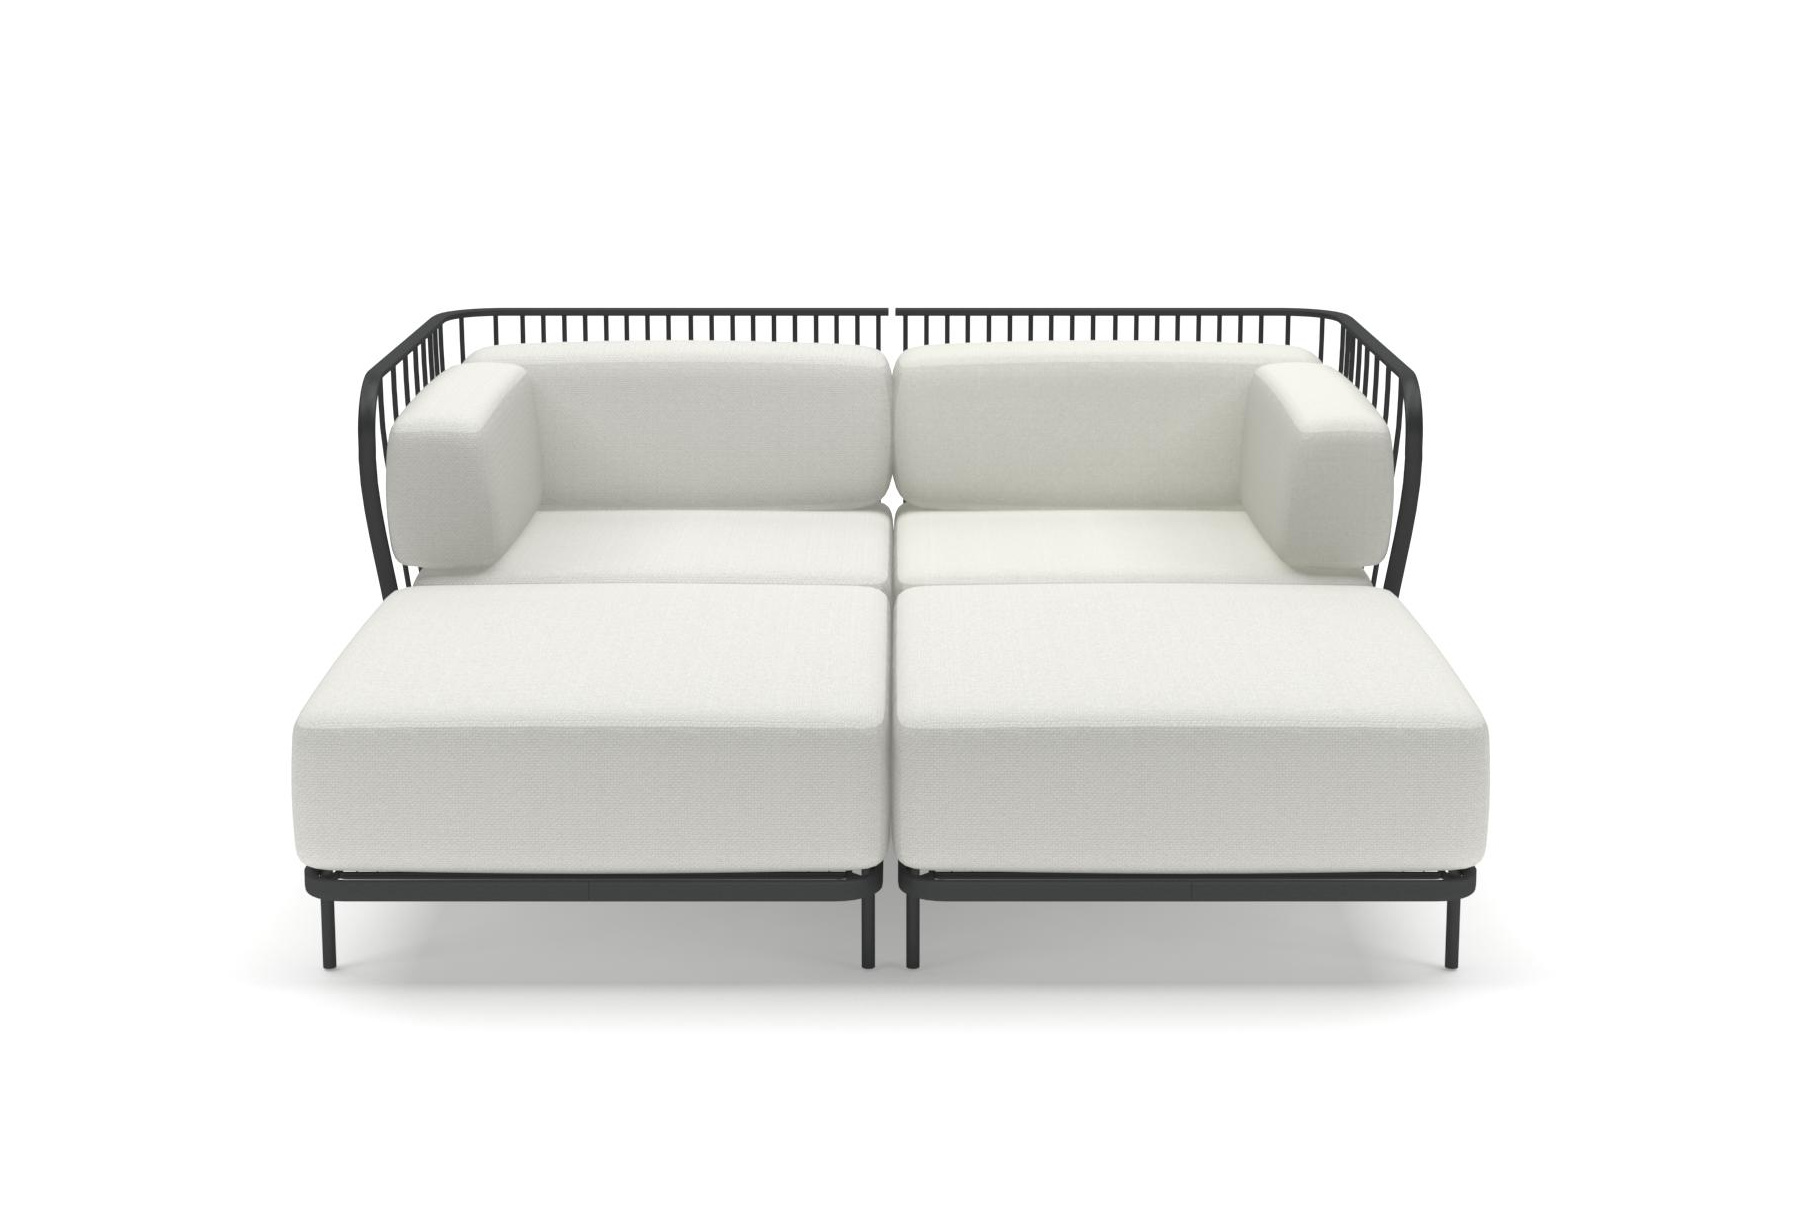 Cannolè Daybed, ahornrot